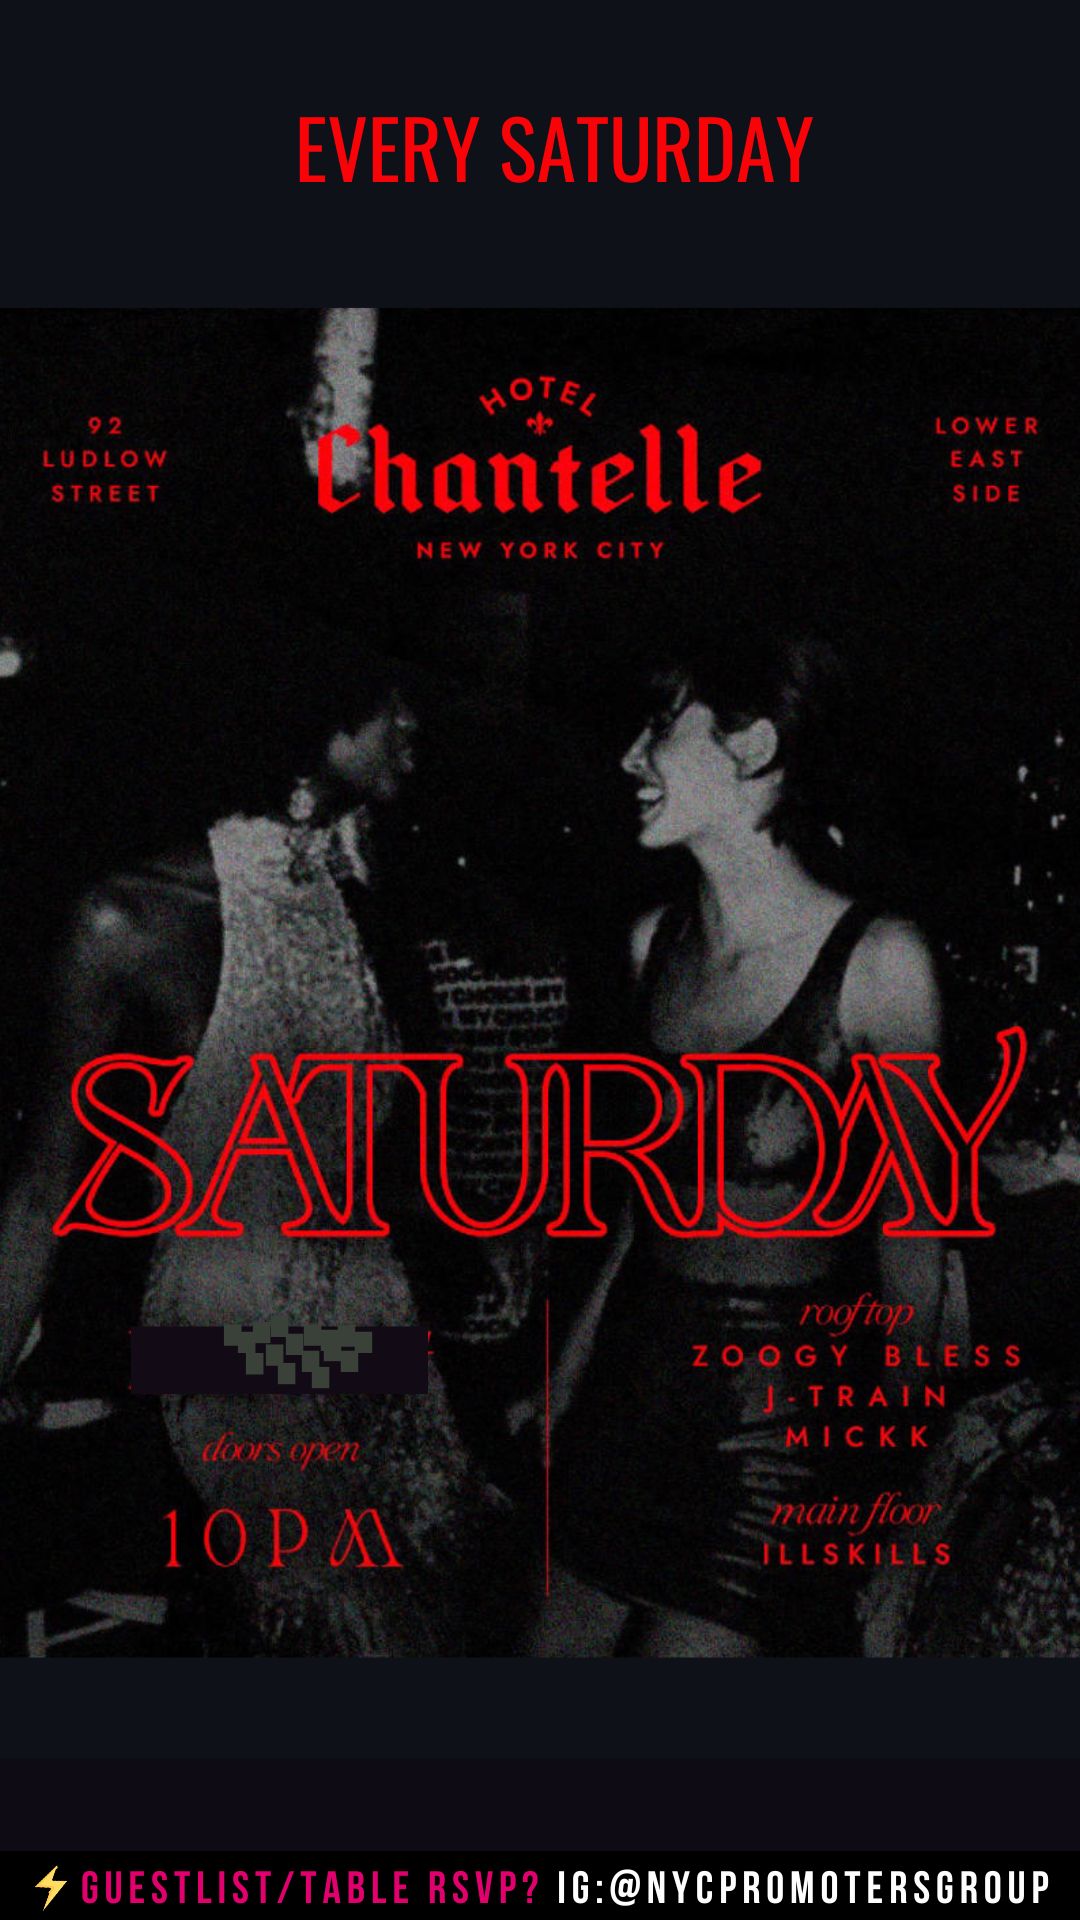 HOTEL CHANTELLE ROOFTOP NYC SATURDAYS